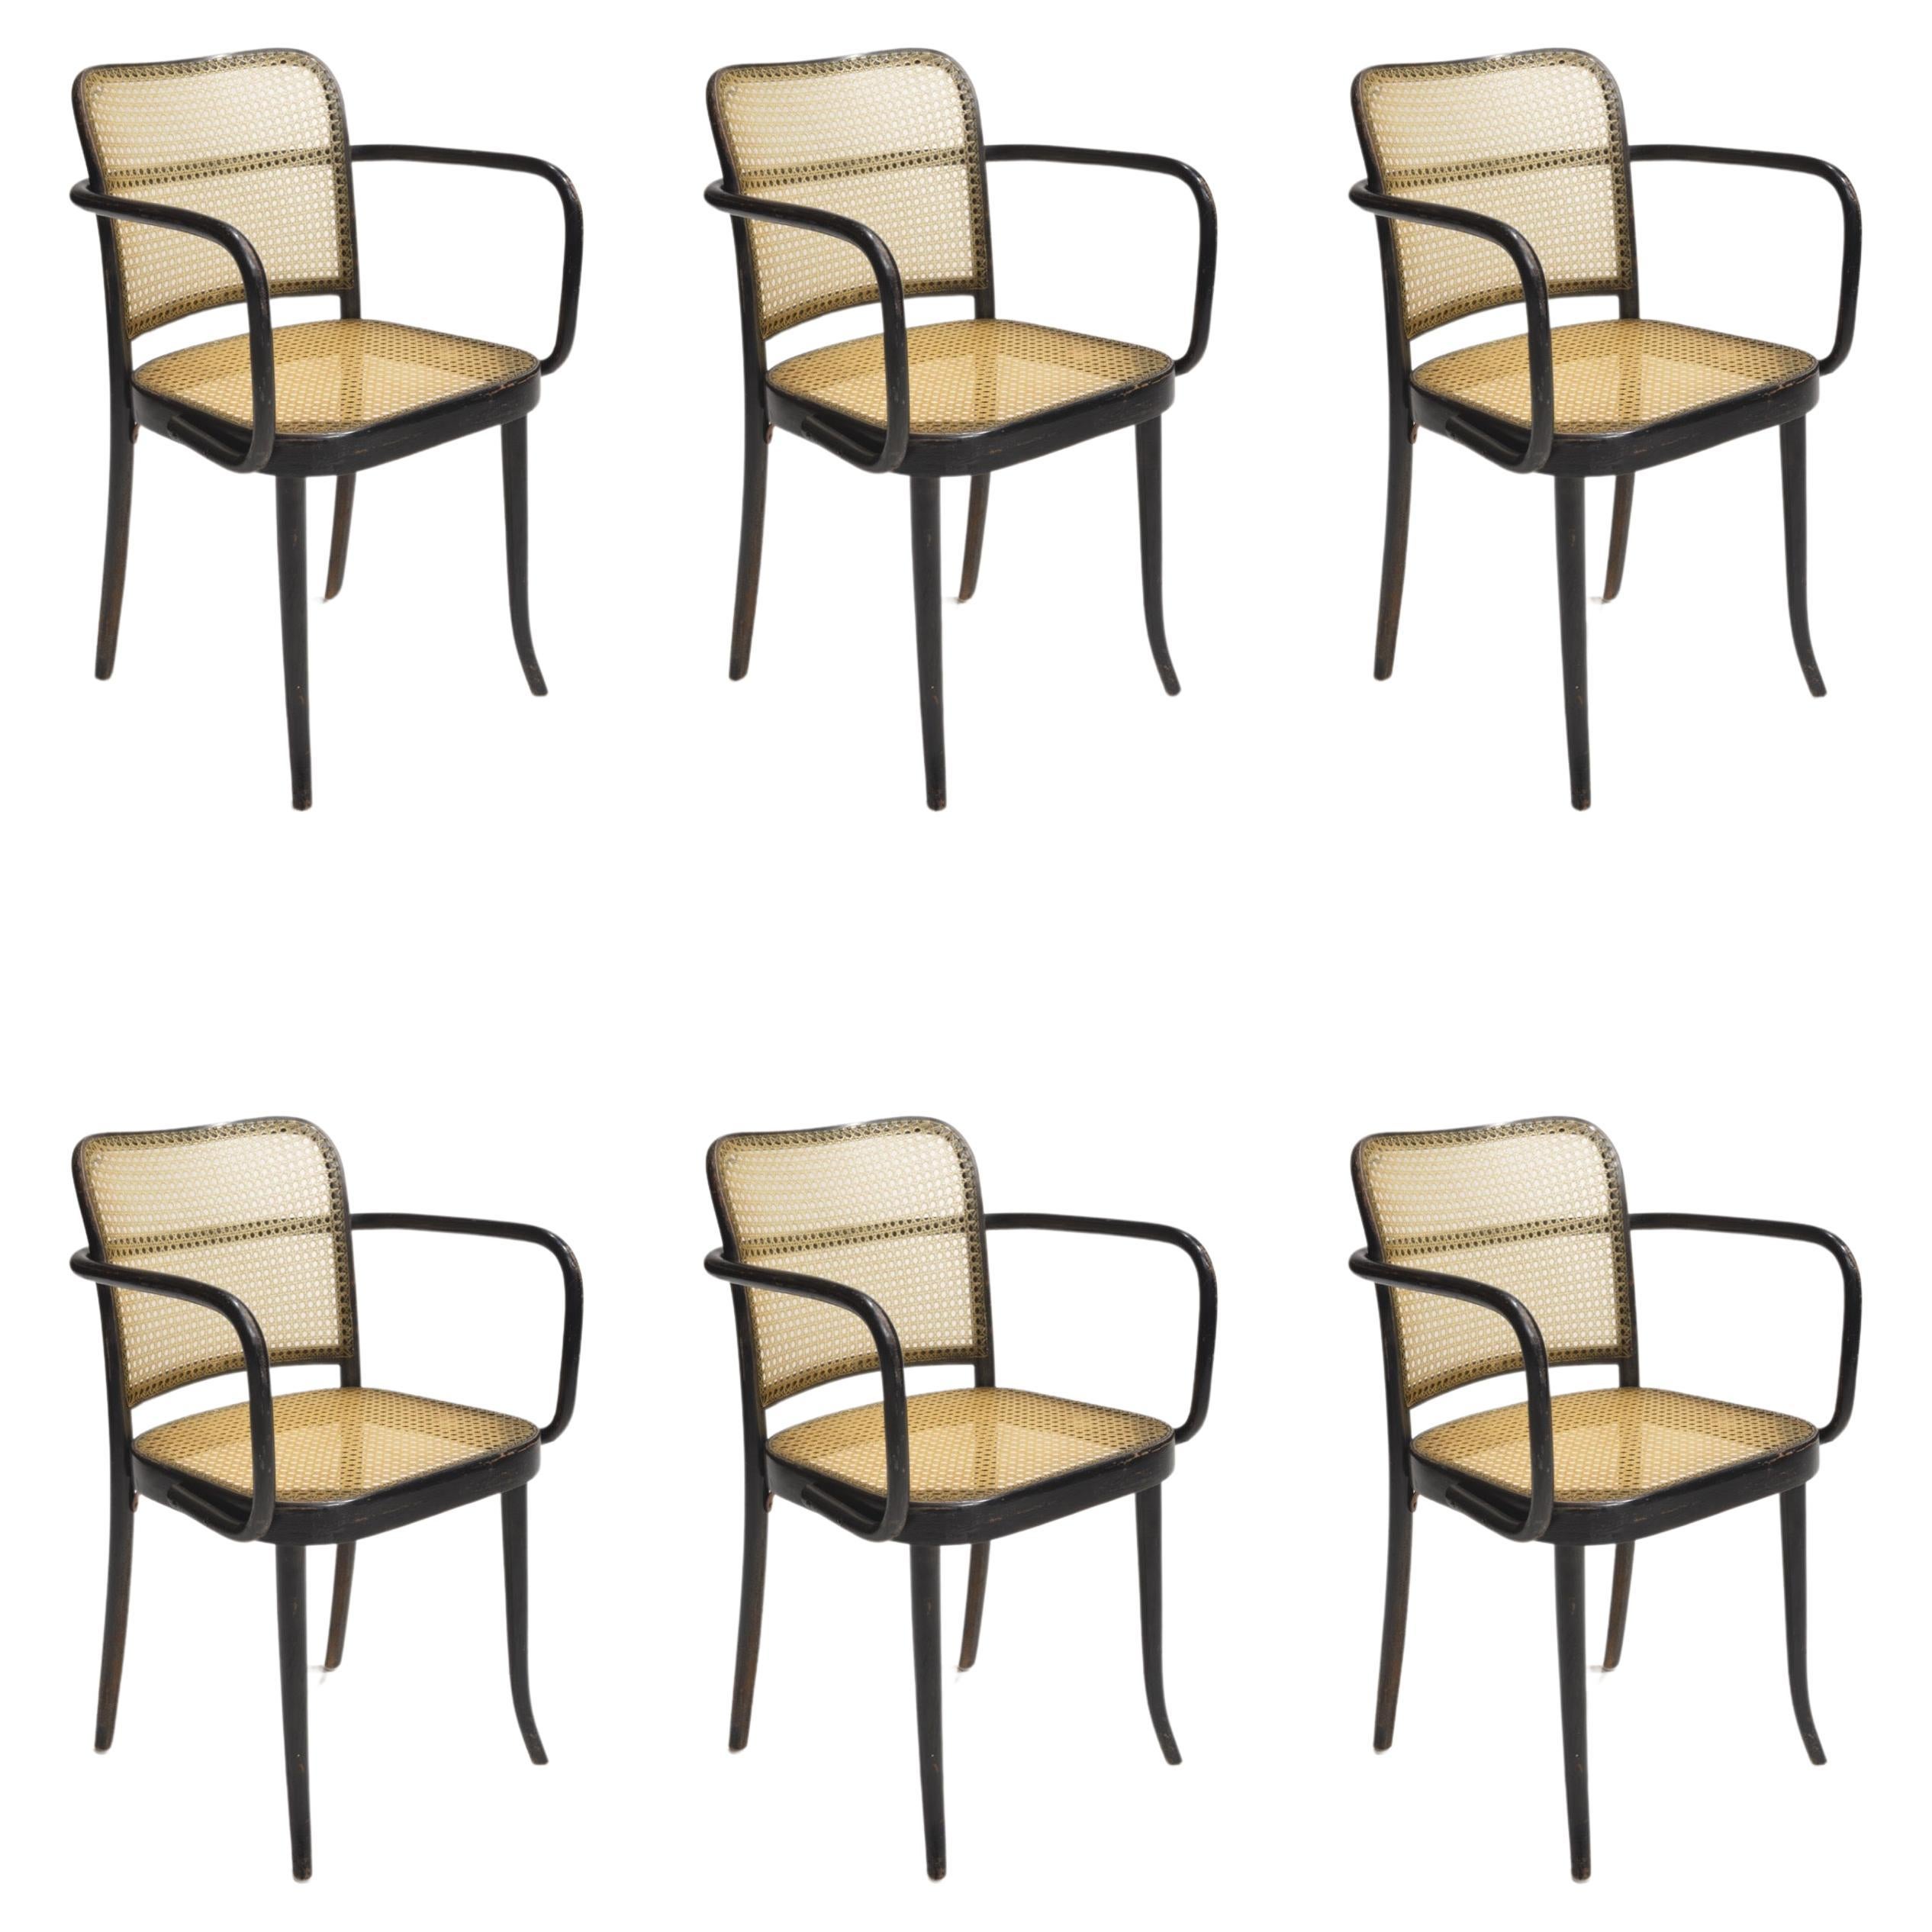 Josef Hoffmann Bentwood Beech Prague Model 811 Chairs in Black and Leather Weave For Sale